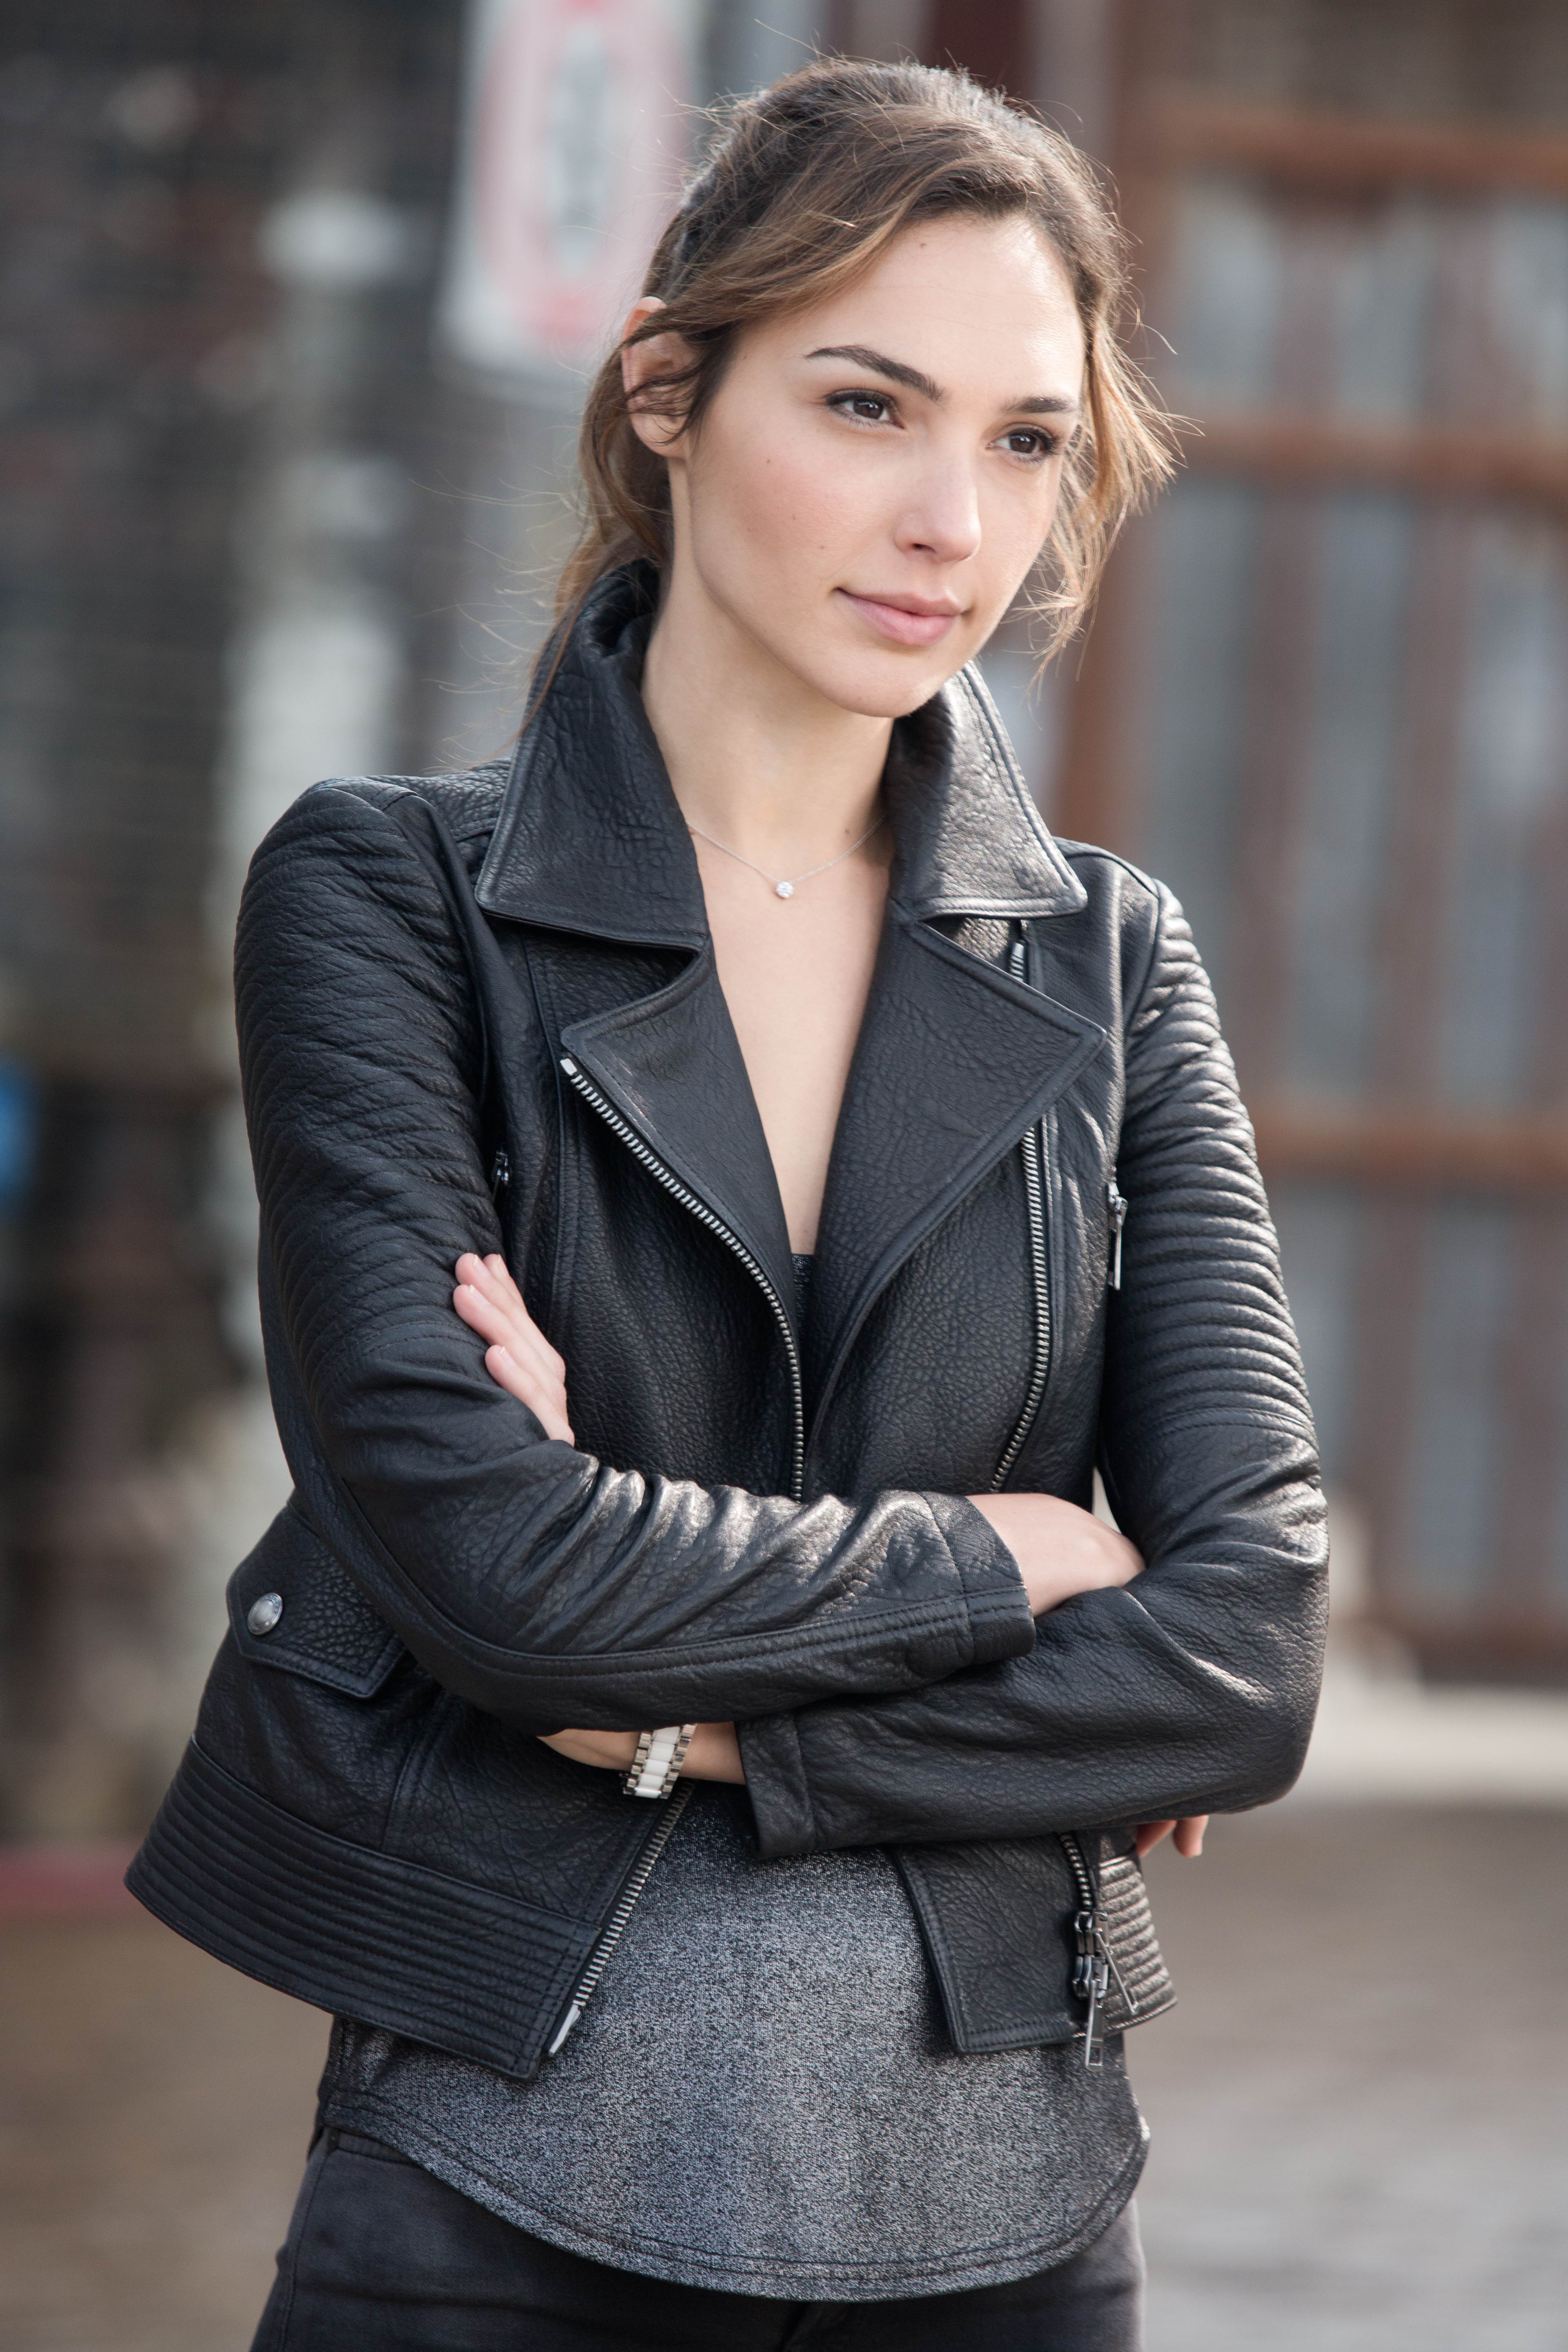 Gal Gadot Actress Leather Jackets Jacket Brunette Looking Away Looking Into The Distance Necklace Ar 3840x5760